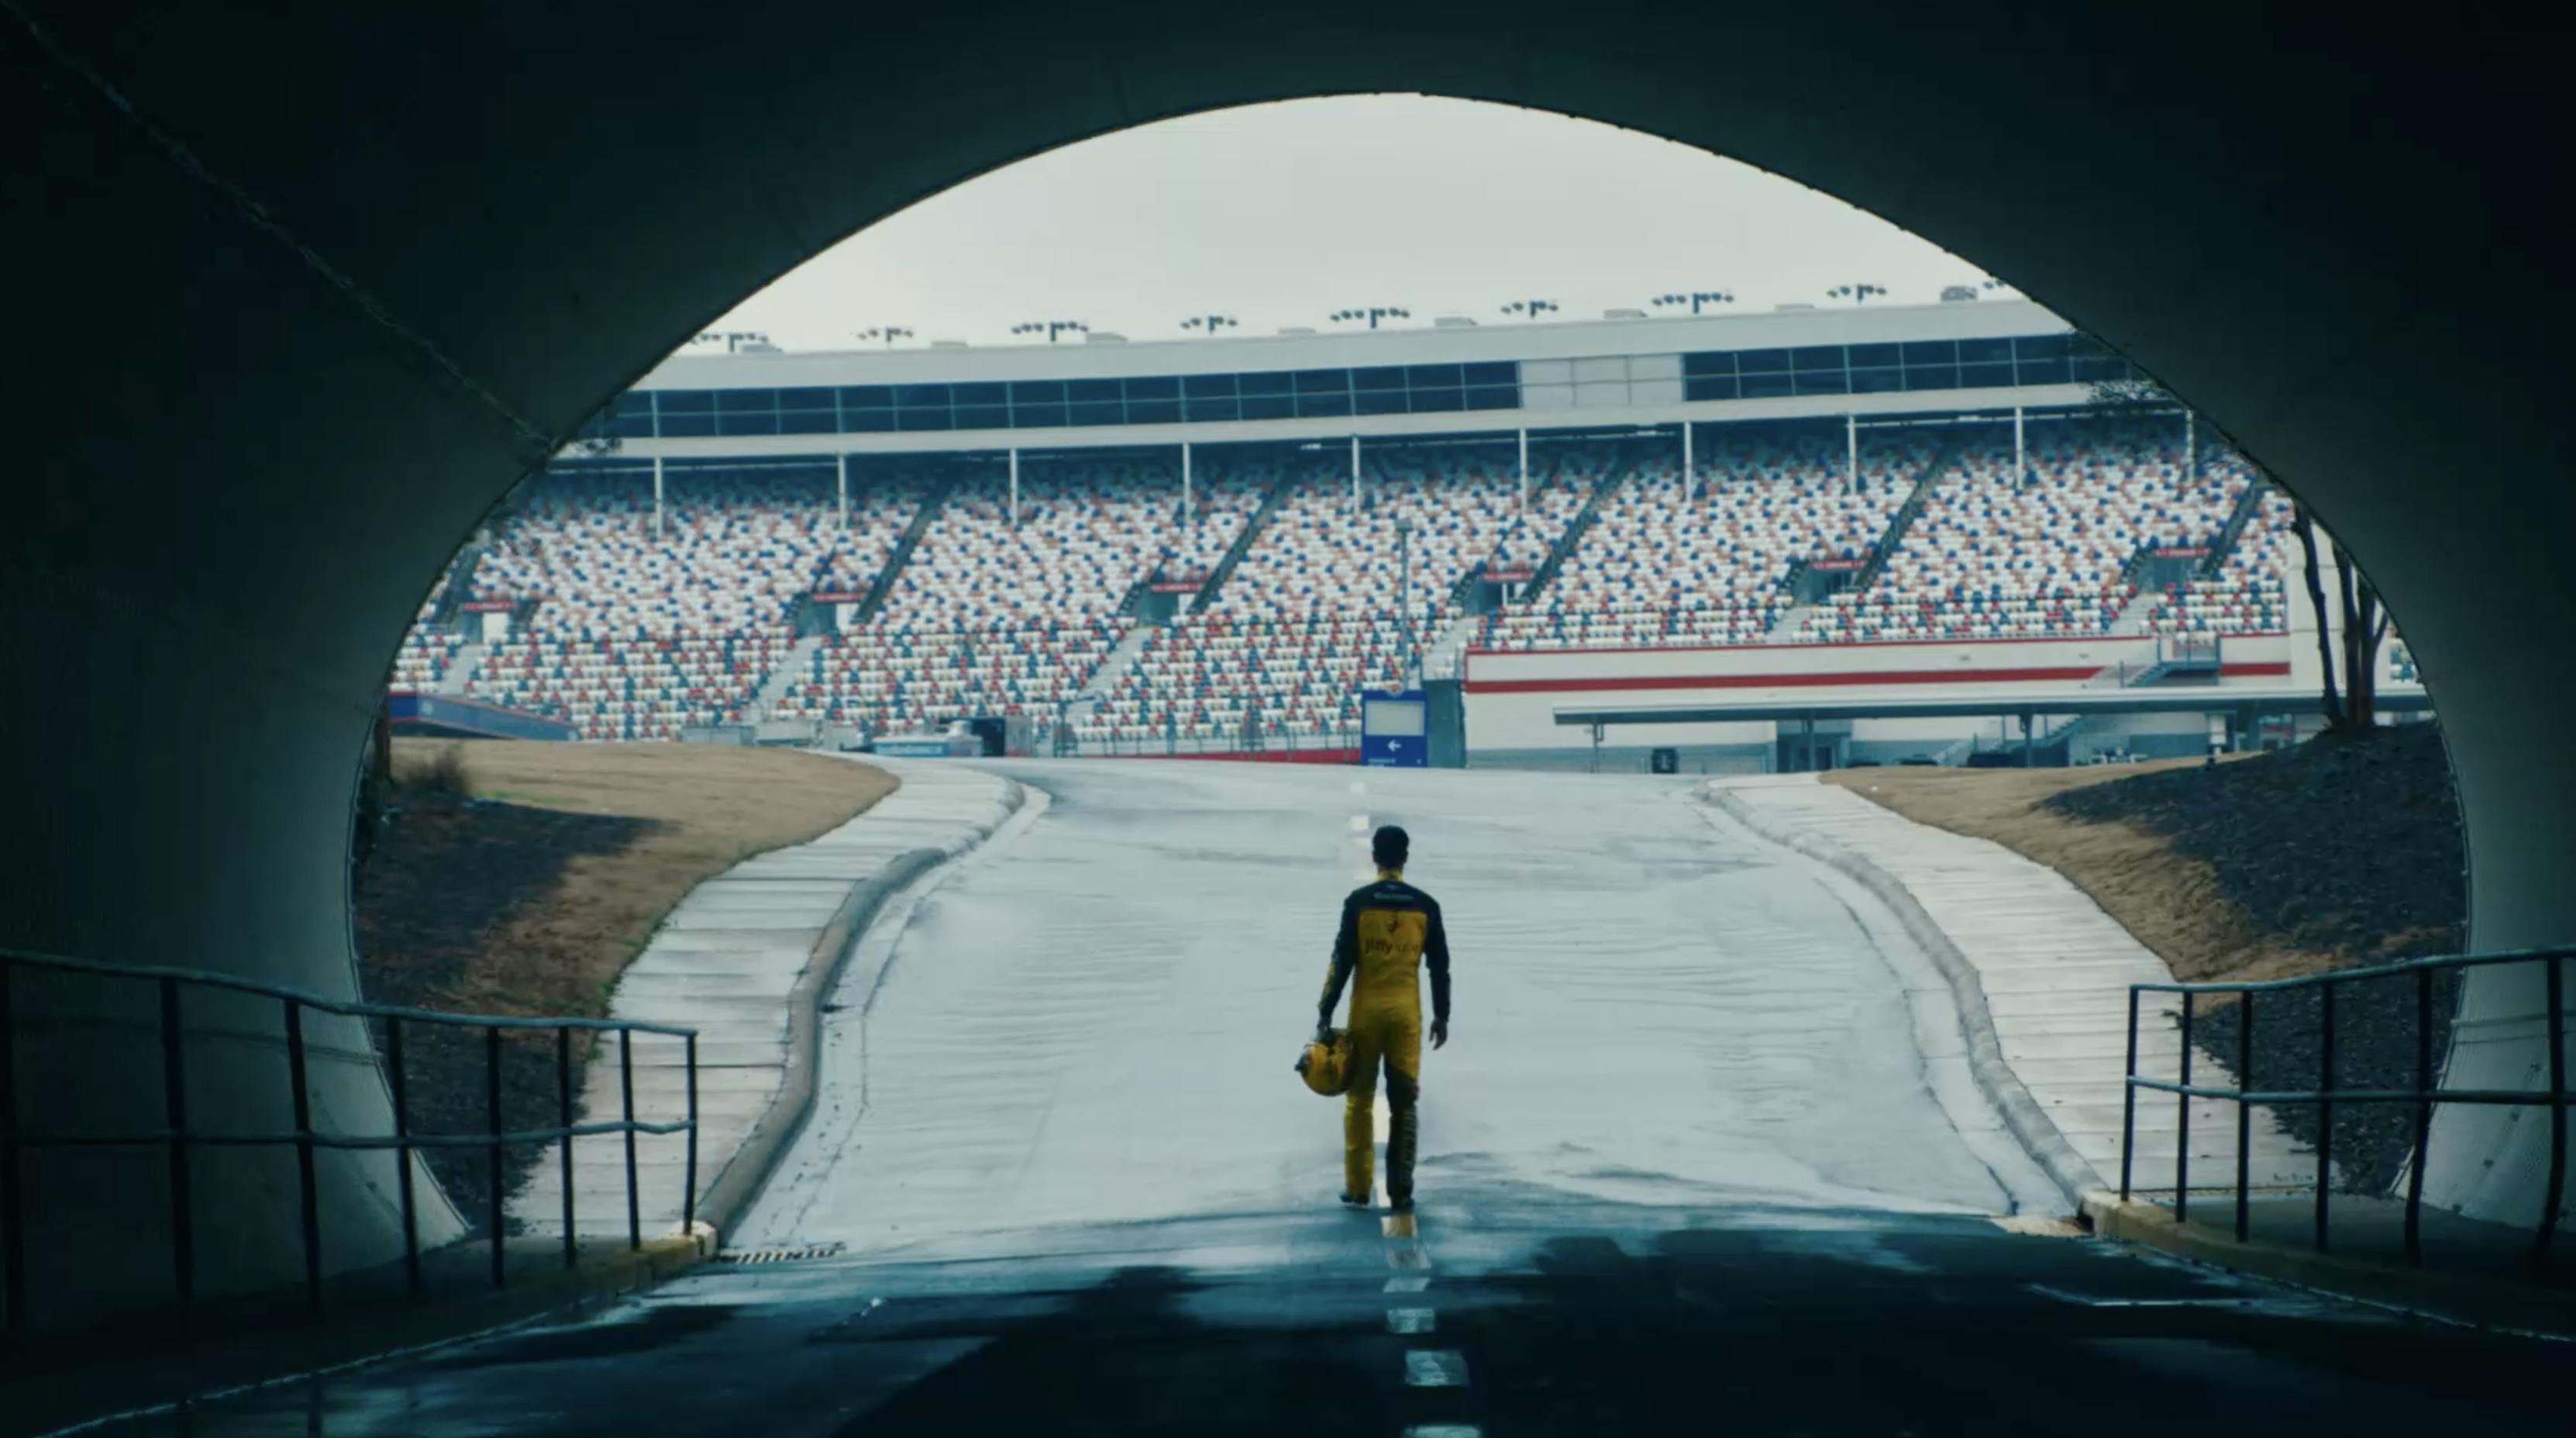 A racecar driver enters the race track, framed by a large tunnel